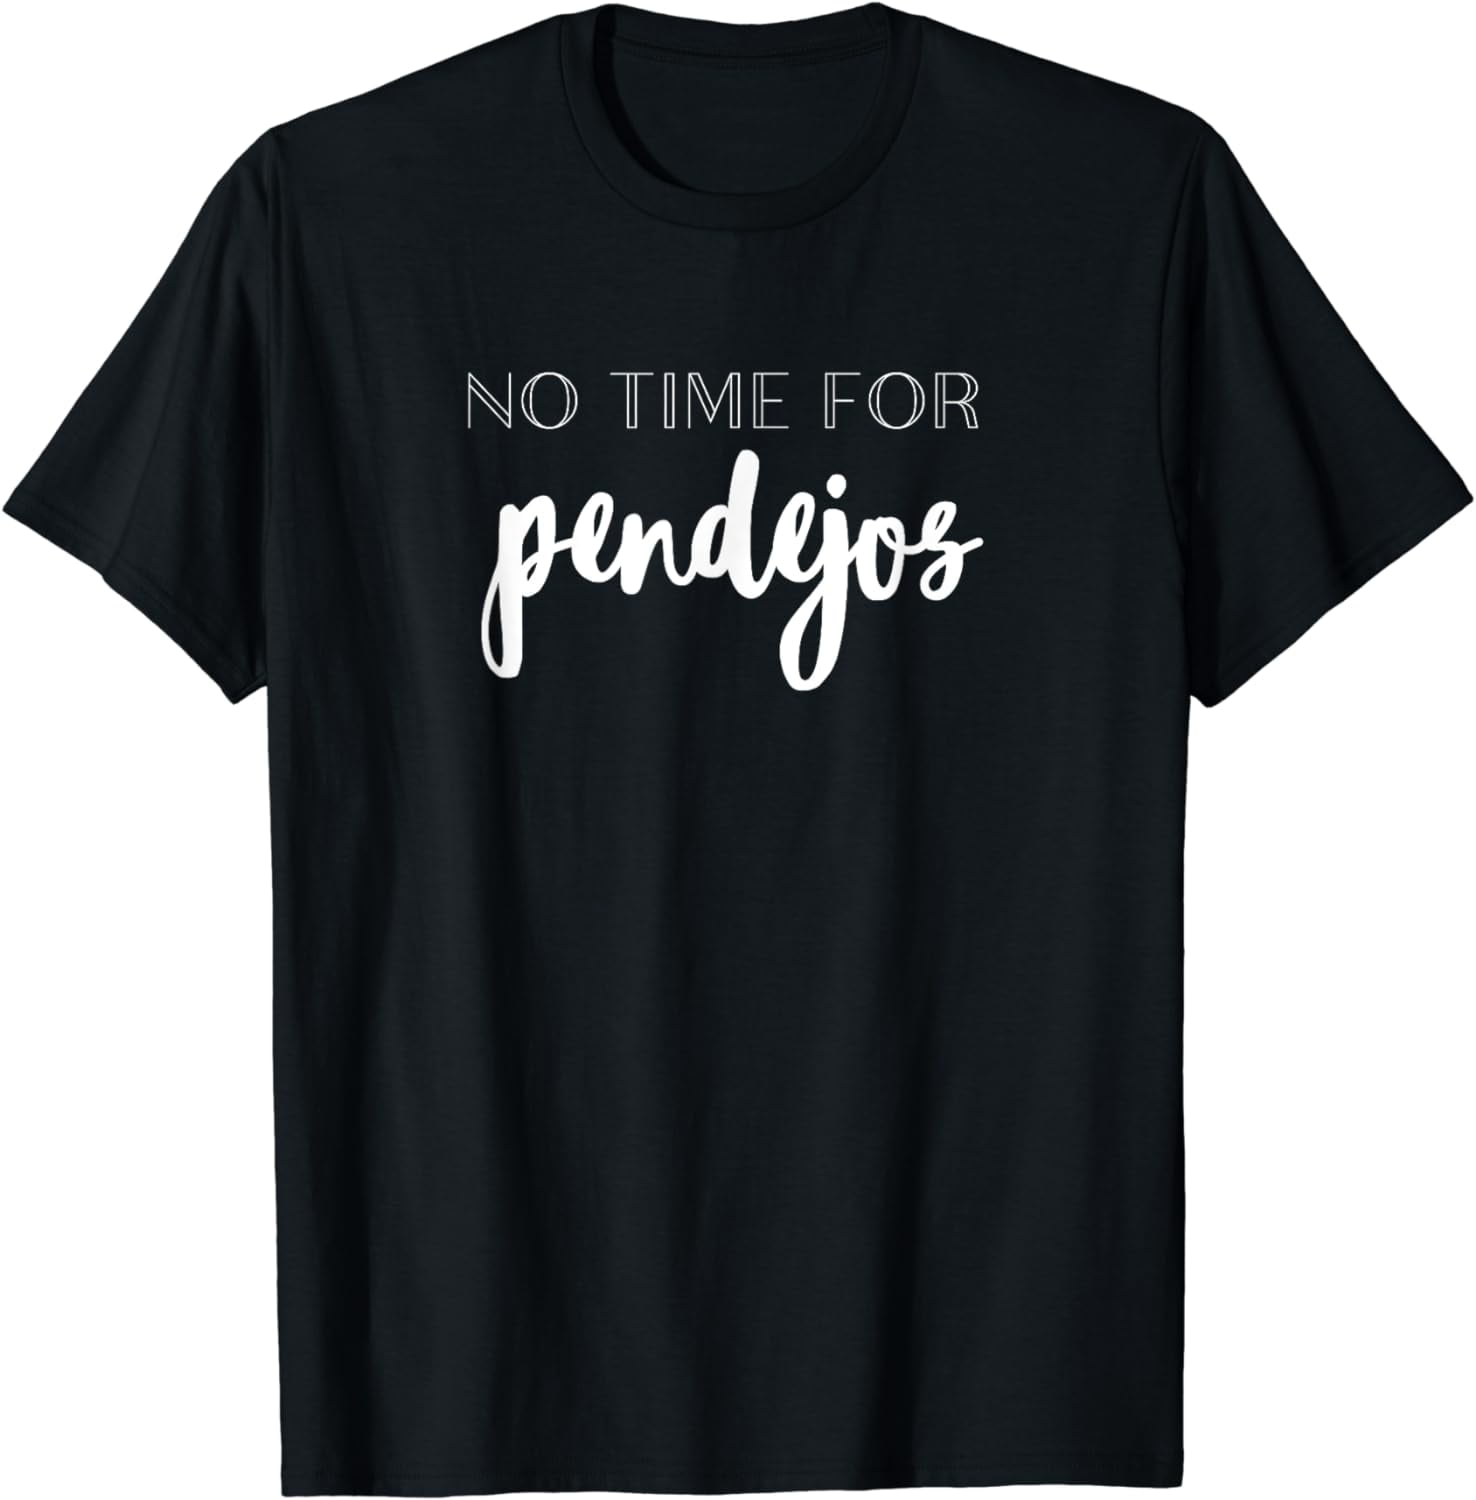 No Time For Pendejos in Spanish Cute Funny Graphic Women's T-Shirt ...